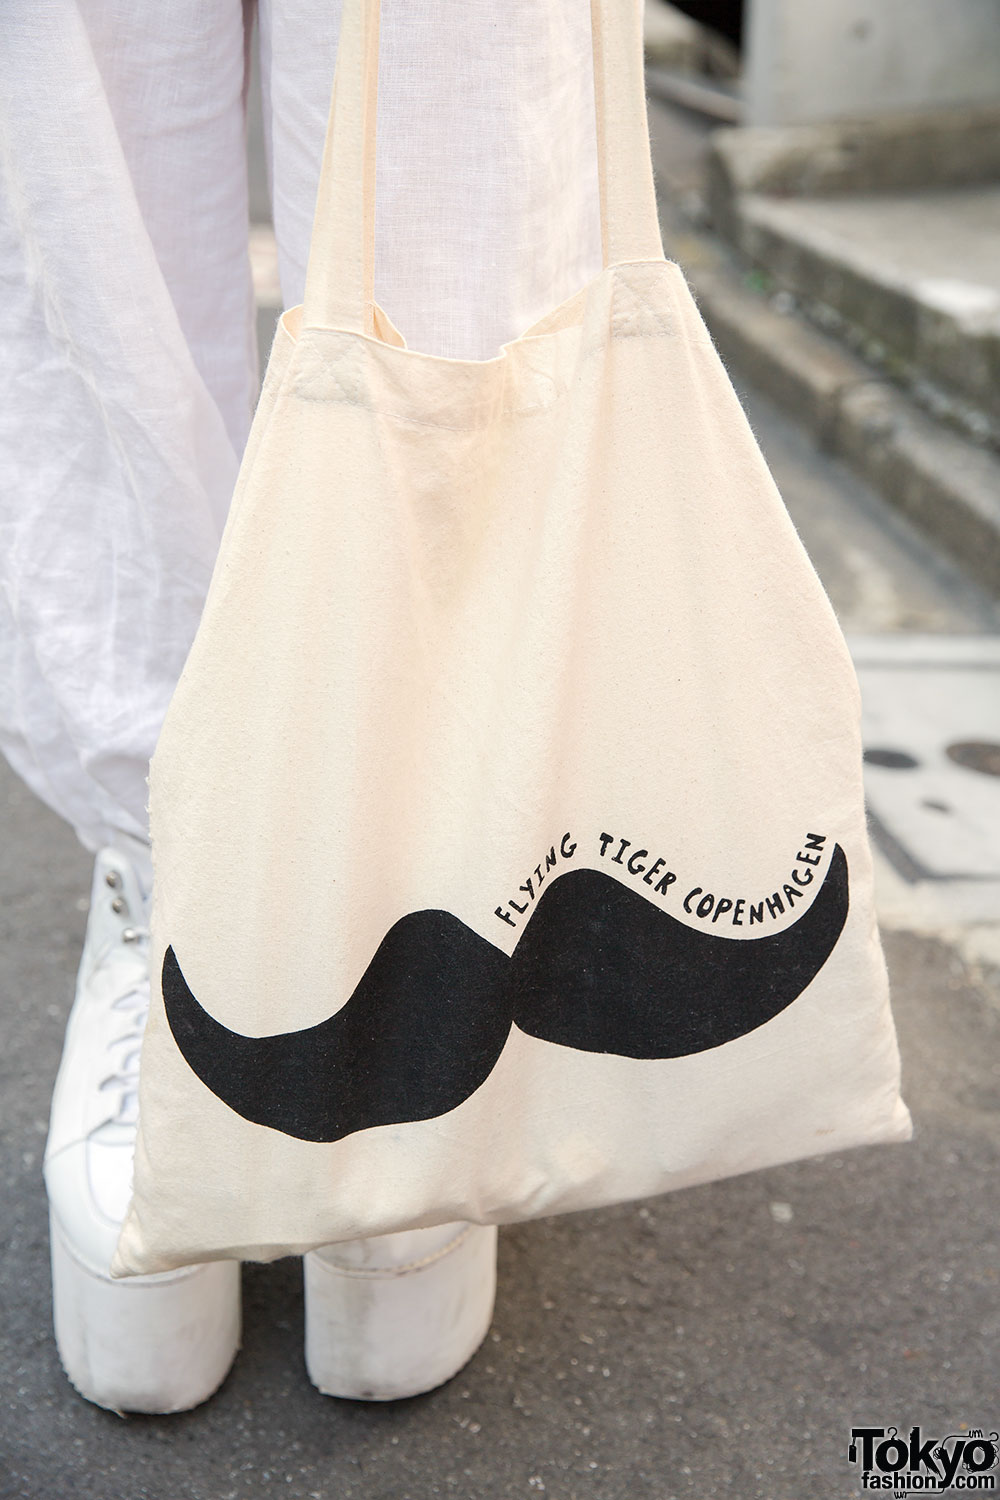 Flying Tiger Copenhagen - It's hard not to customise your tote bag